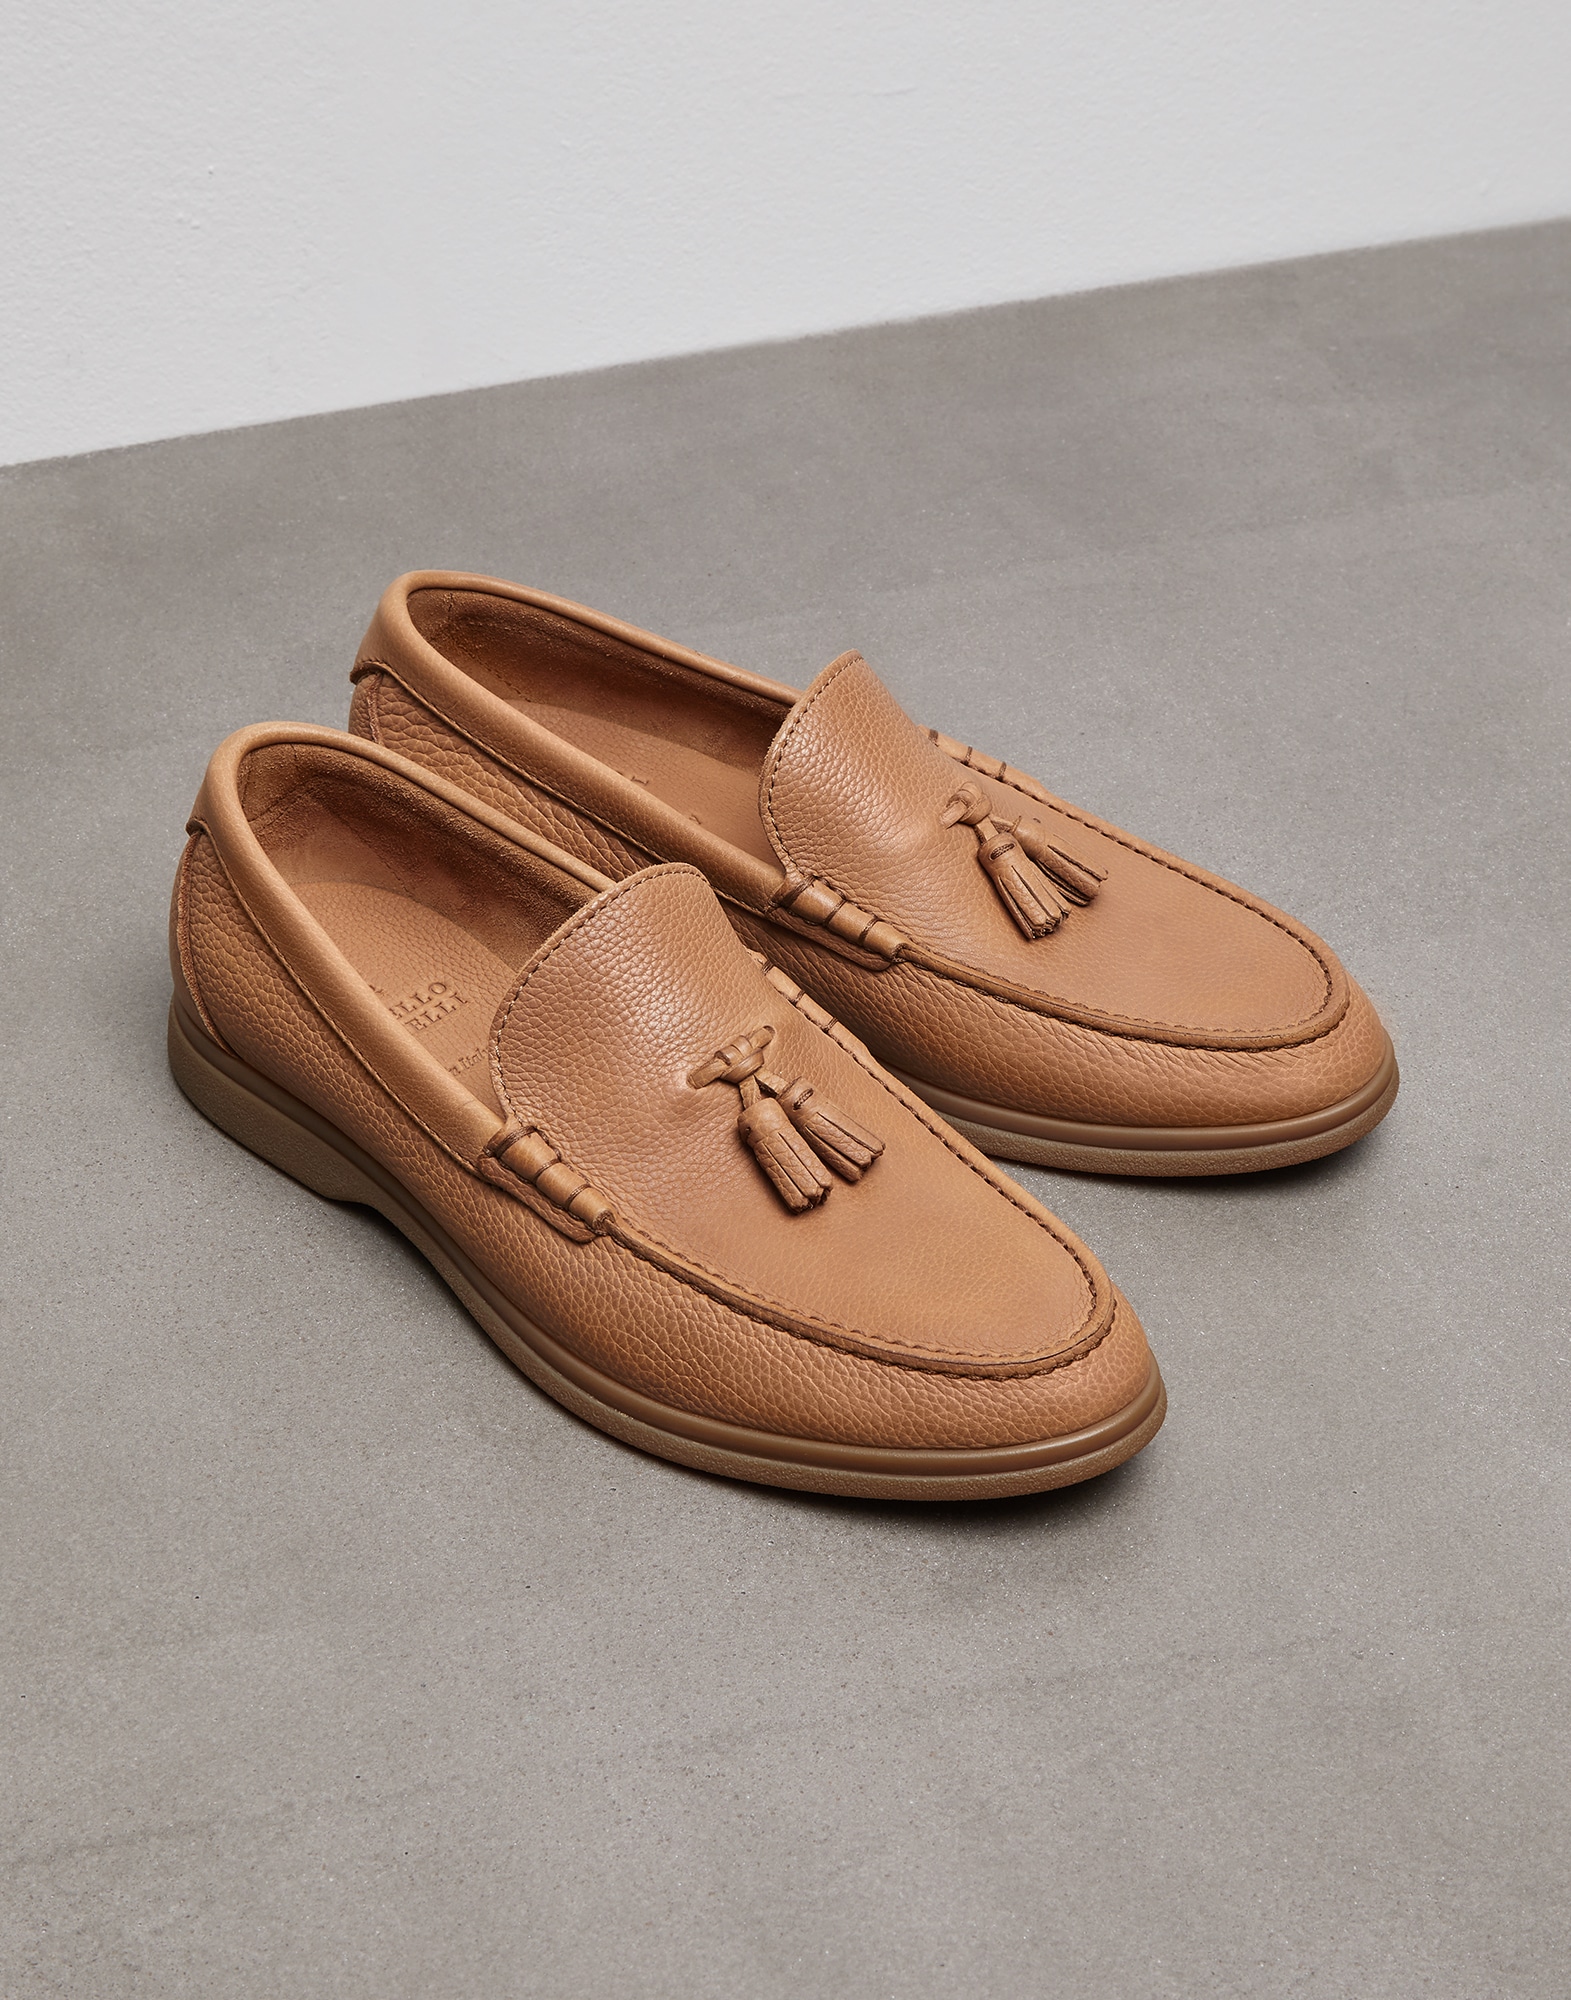 unlined moccasins